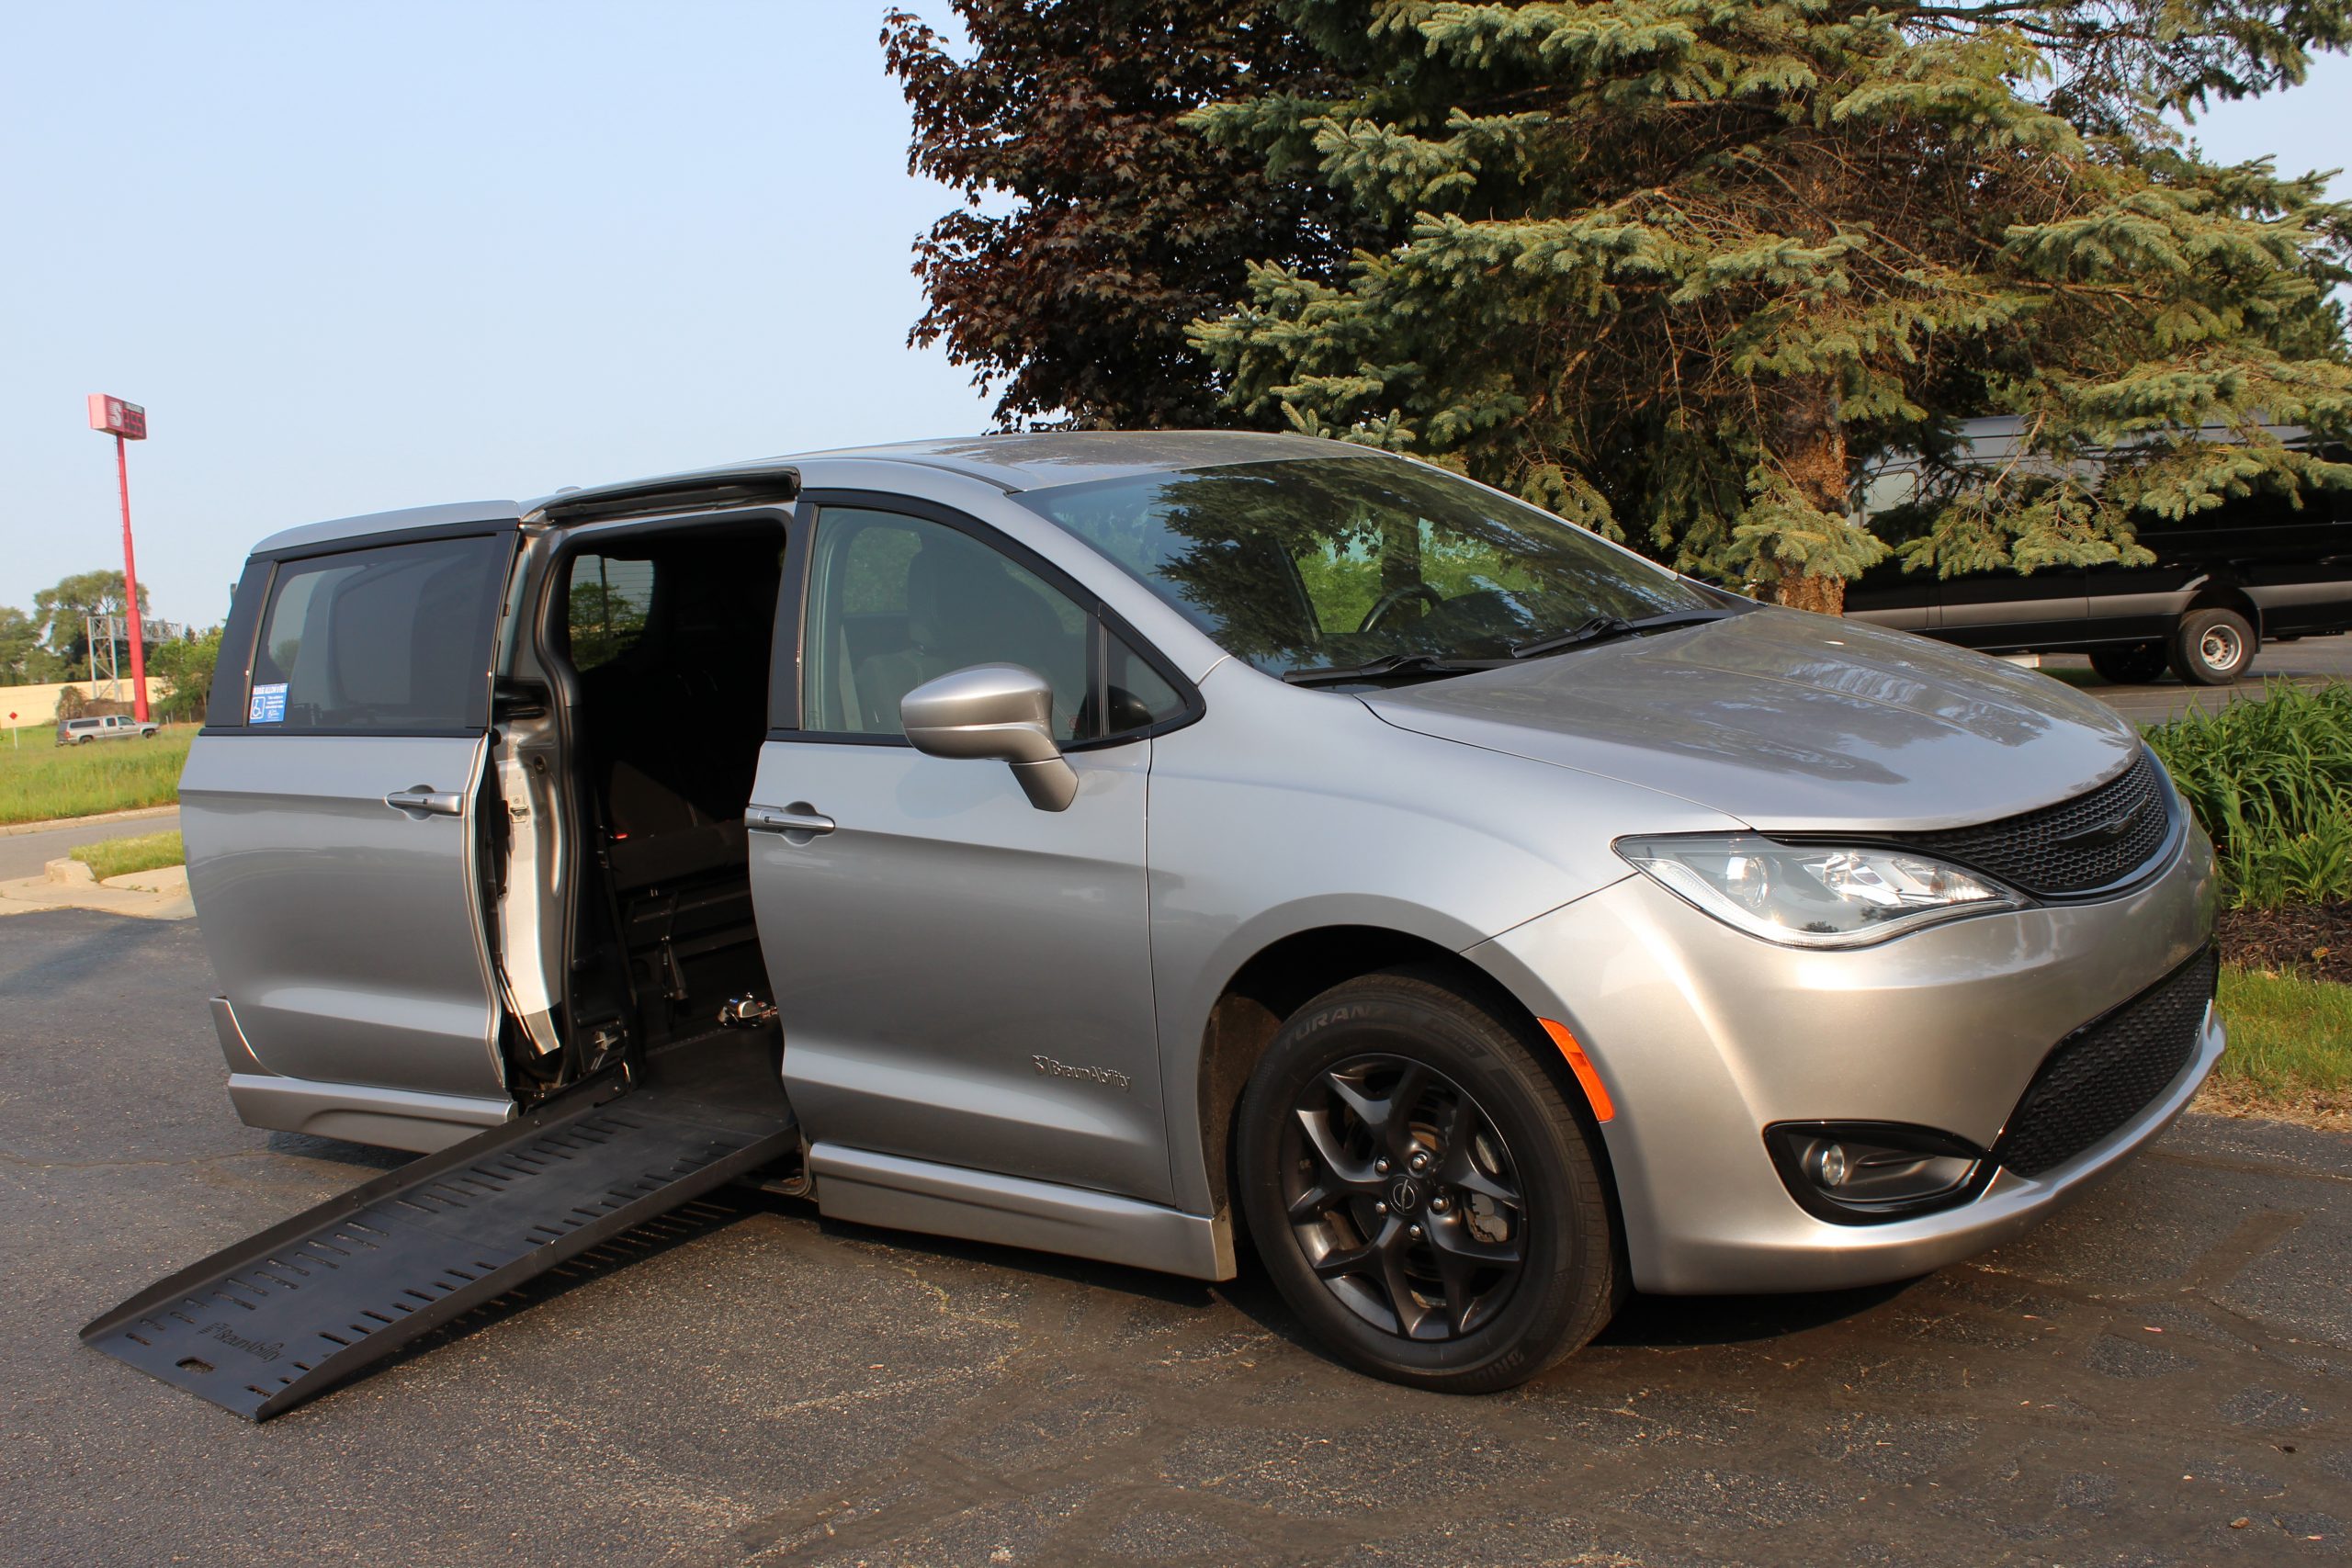 2019 Billet Silver Chrysler Pacifica Touring Sport with BraunAbility EVII Conversion